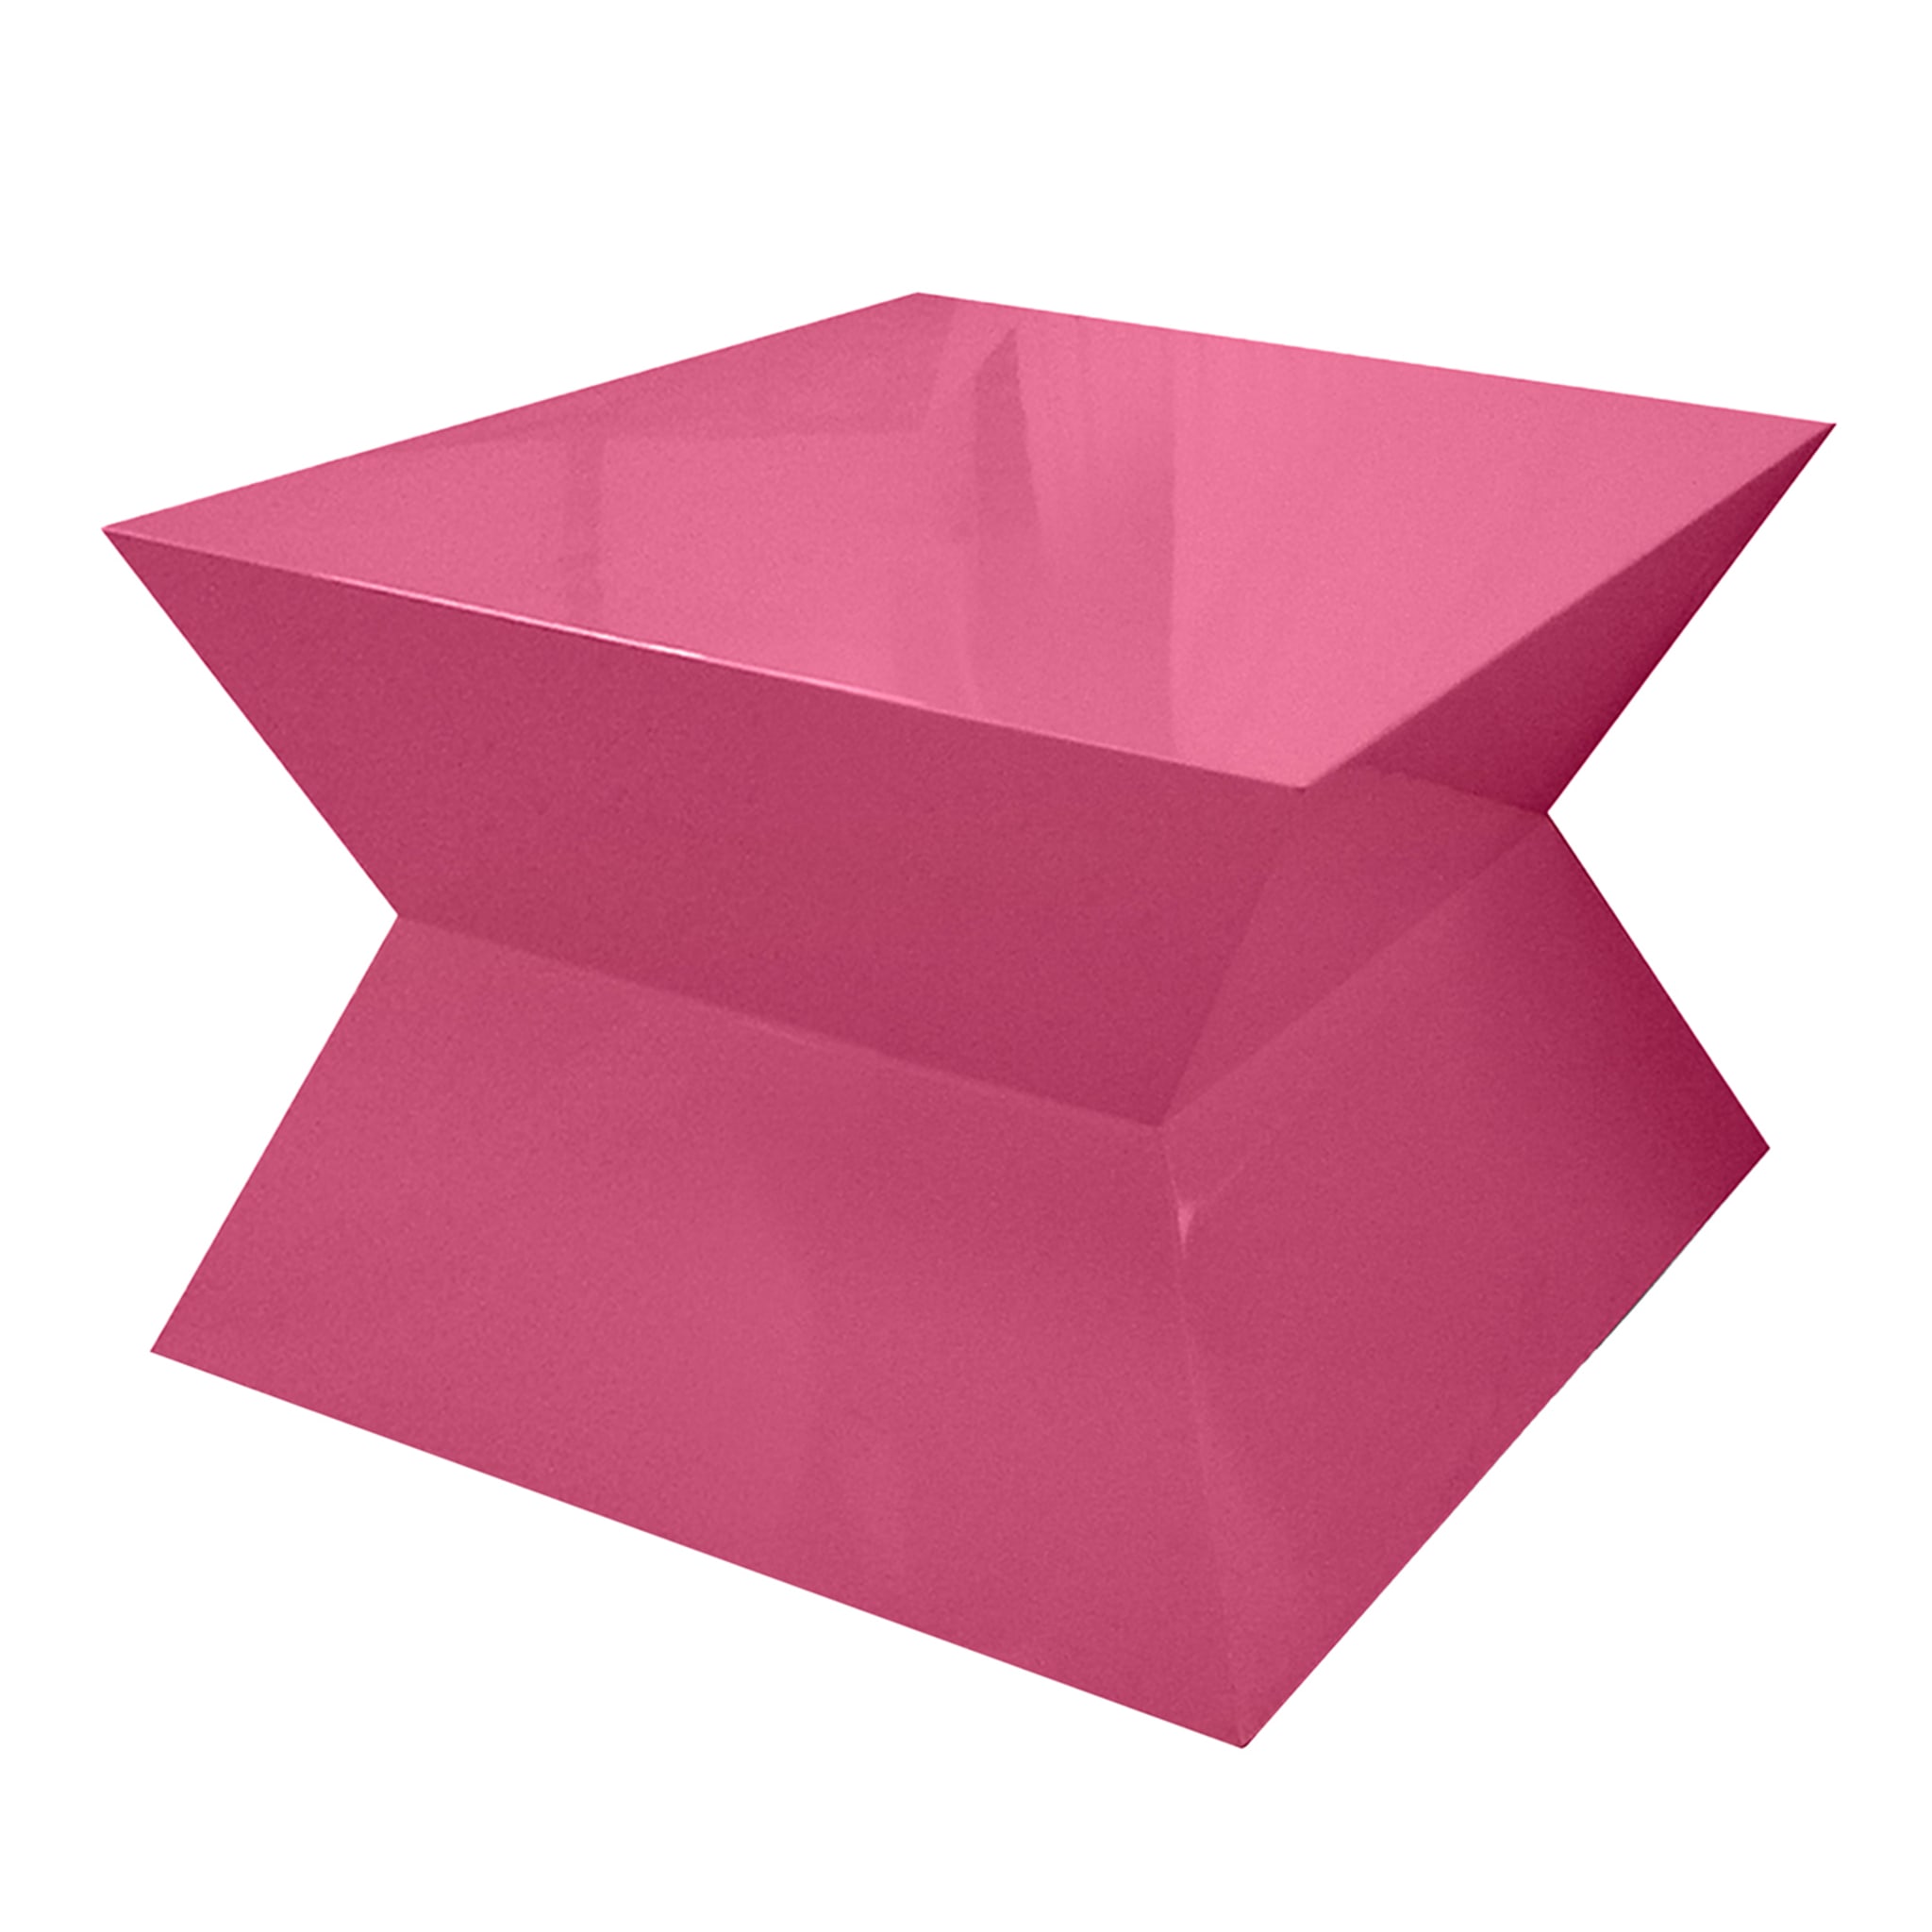 Pop & Op Pink Hourglass-Shaped Coffee Table by Carlo Rampazzi - Main view